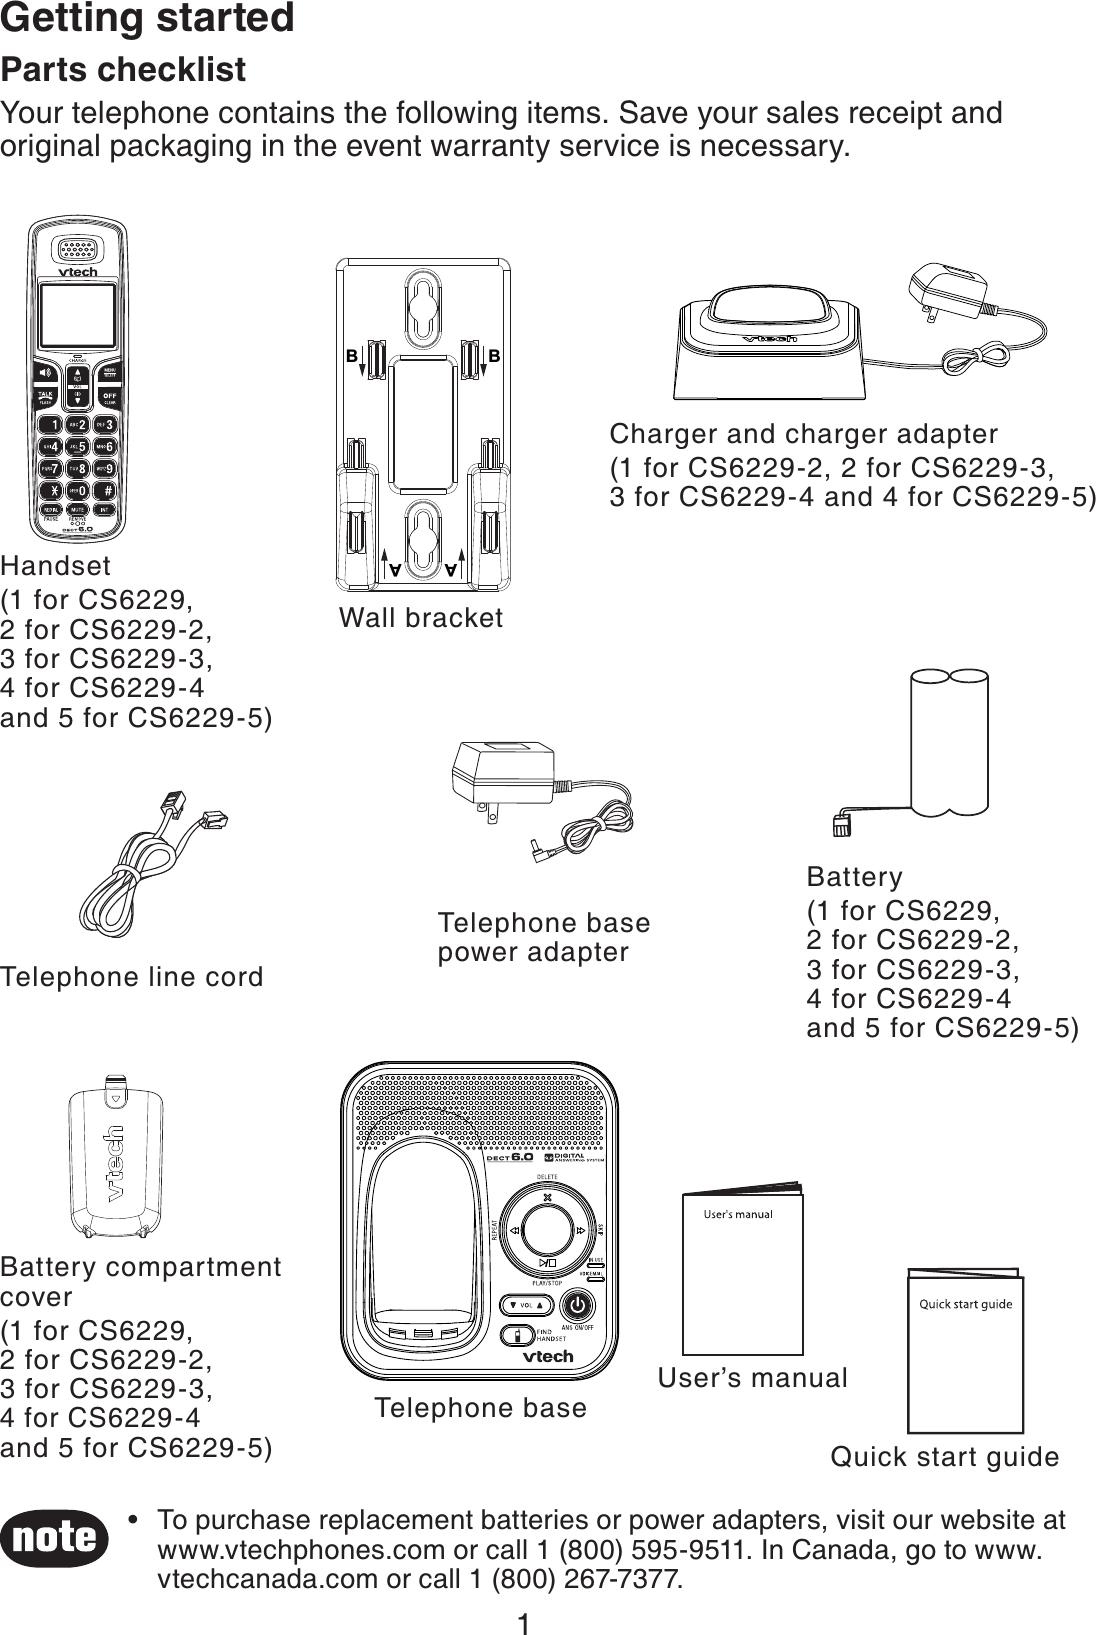 1Telephone line cordParts checklistYour telephone contains the following items. Save your sales receipt and original packaging in the event warranty service is necessary.Quick start guideHandset(1 for CS6229,2 for CS6229-2,3 for CS6229-3,4 for CS6229-4 and 5 for CS6229-5)Telephone baseCharger and charger adapter(1 for CS6229-2, 2 for CS6229-3,    3 for CS6229-4 and 4 for CS6229-5)Battery compartment cover(1 for CS6229,2 for CS6229-2,3 for CS6229-3,4 for CS6229-4 and 5 for CS6229-5)Battery(1 for CS6229,2 for CS6229-2,3 for CS6229-3,4 for CS6229-4and 5 for CS6229-5)Telephone base    power adapterUser’s manualTo purchase replacement batteries or power adapters, visit our website at www.vtechphones.com or call 1 (800) 595-9511. In Canada, go to www.vtechcanada.com or call 1 (800) 267-7377.•Wall bracketGetting startedBAAB